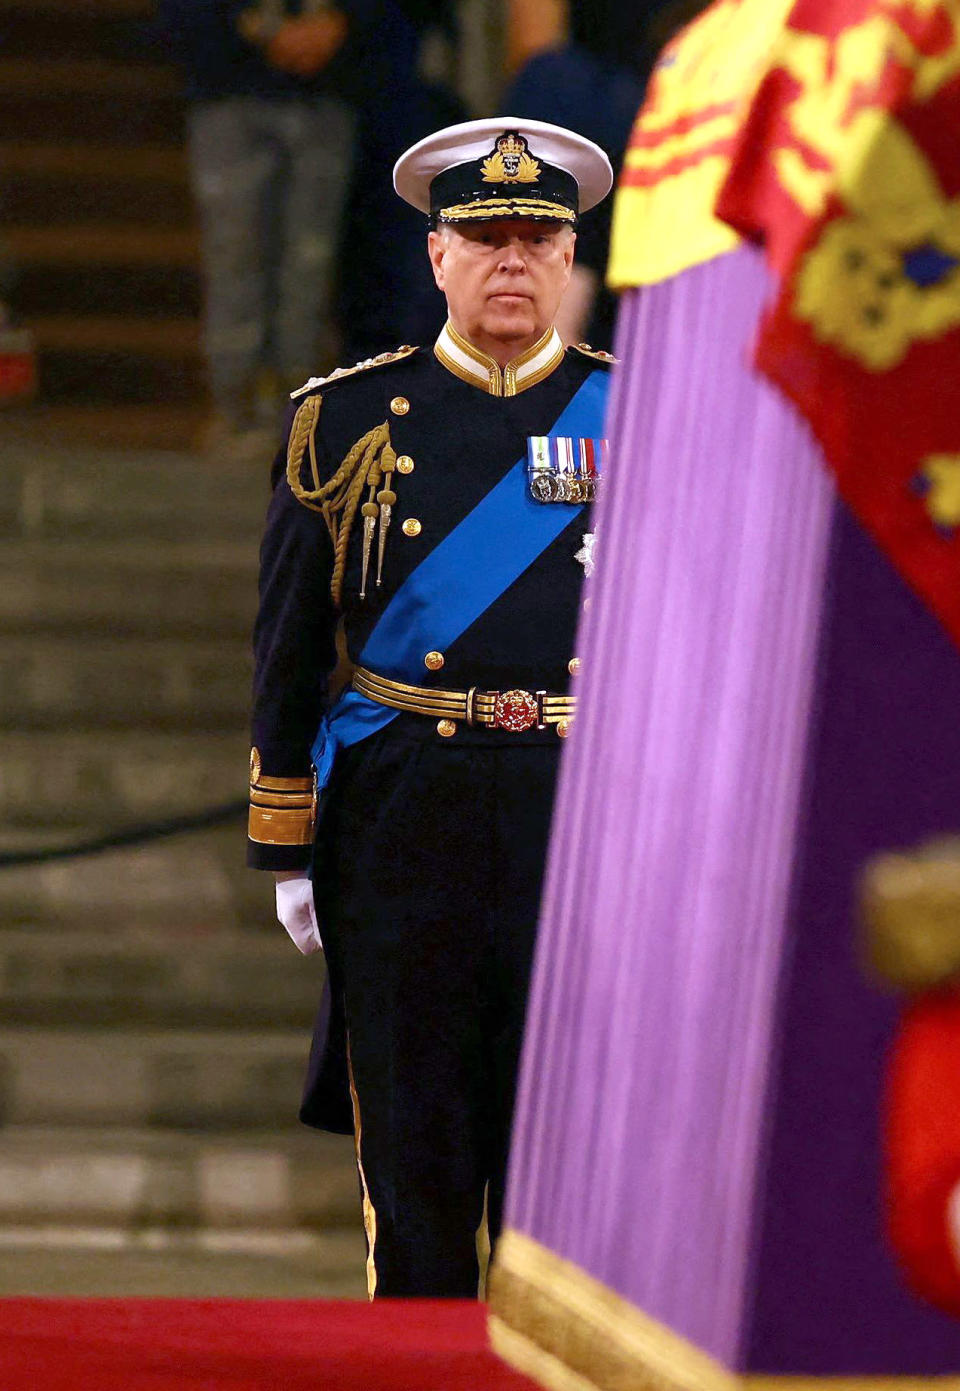 <p>Although it was announced earlier this week that only working members of the royal family would wear military uniforms for the Queen's funerary events, a <a href="https://people.com/royals/prince-harry-prince-andrew-will-not-wear-military-uniforms-queen-elizabeth-funeral/" rel="nofollow noopener" target="_blank" data-ylk="slk:special exception" class="link ">special exception</a> was made for Prince Andrew to wear his military uniform for Friday's vigil as a sign of respect to his late mother. </p>